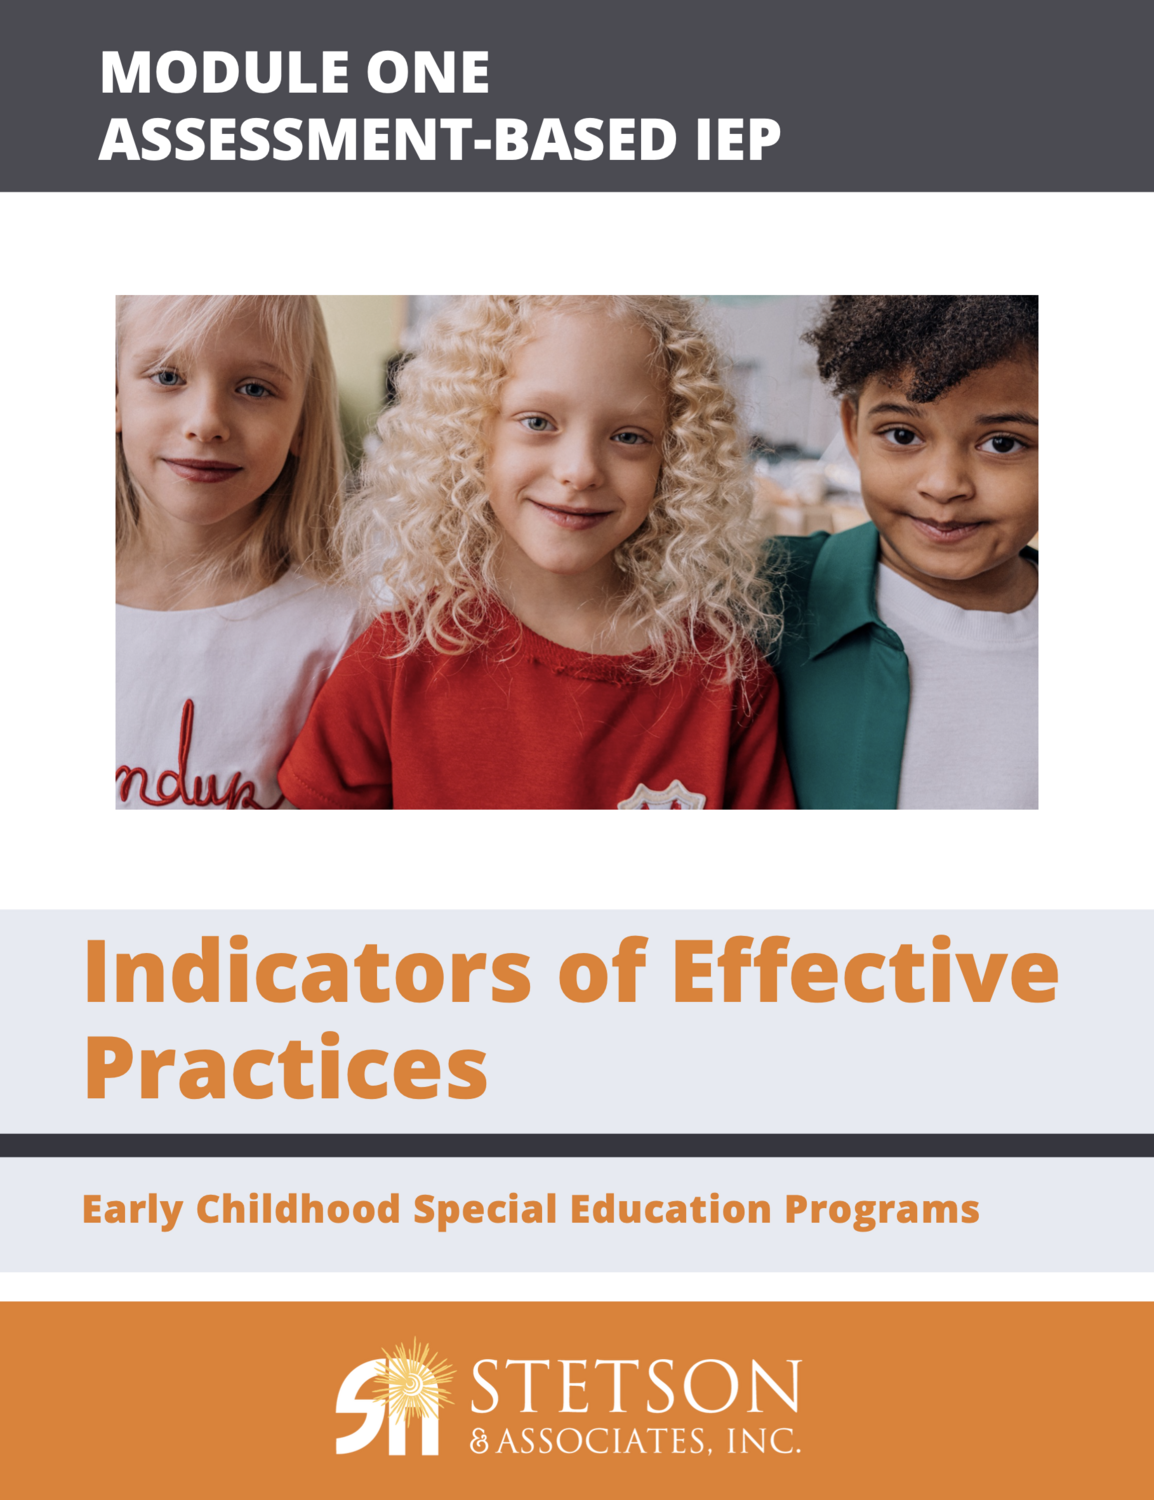 Early Childhood Special Education Programs: Module 1 Assessment-Based IEP